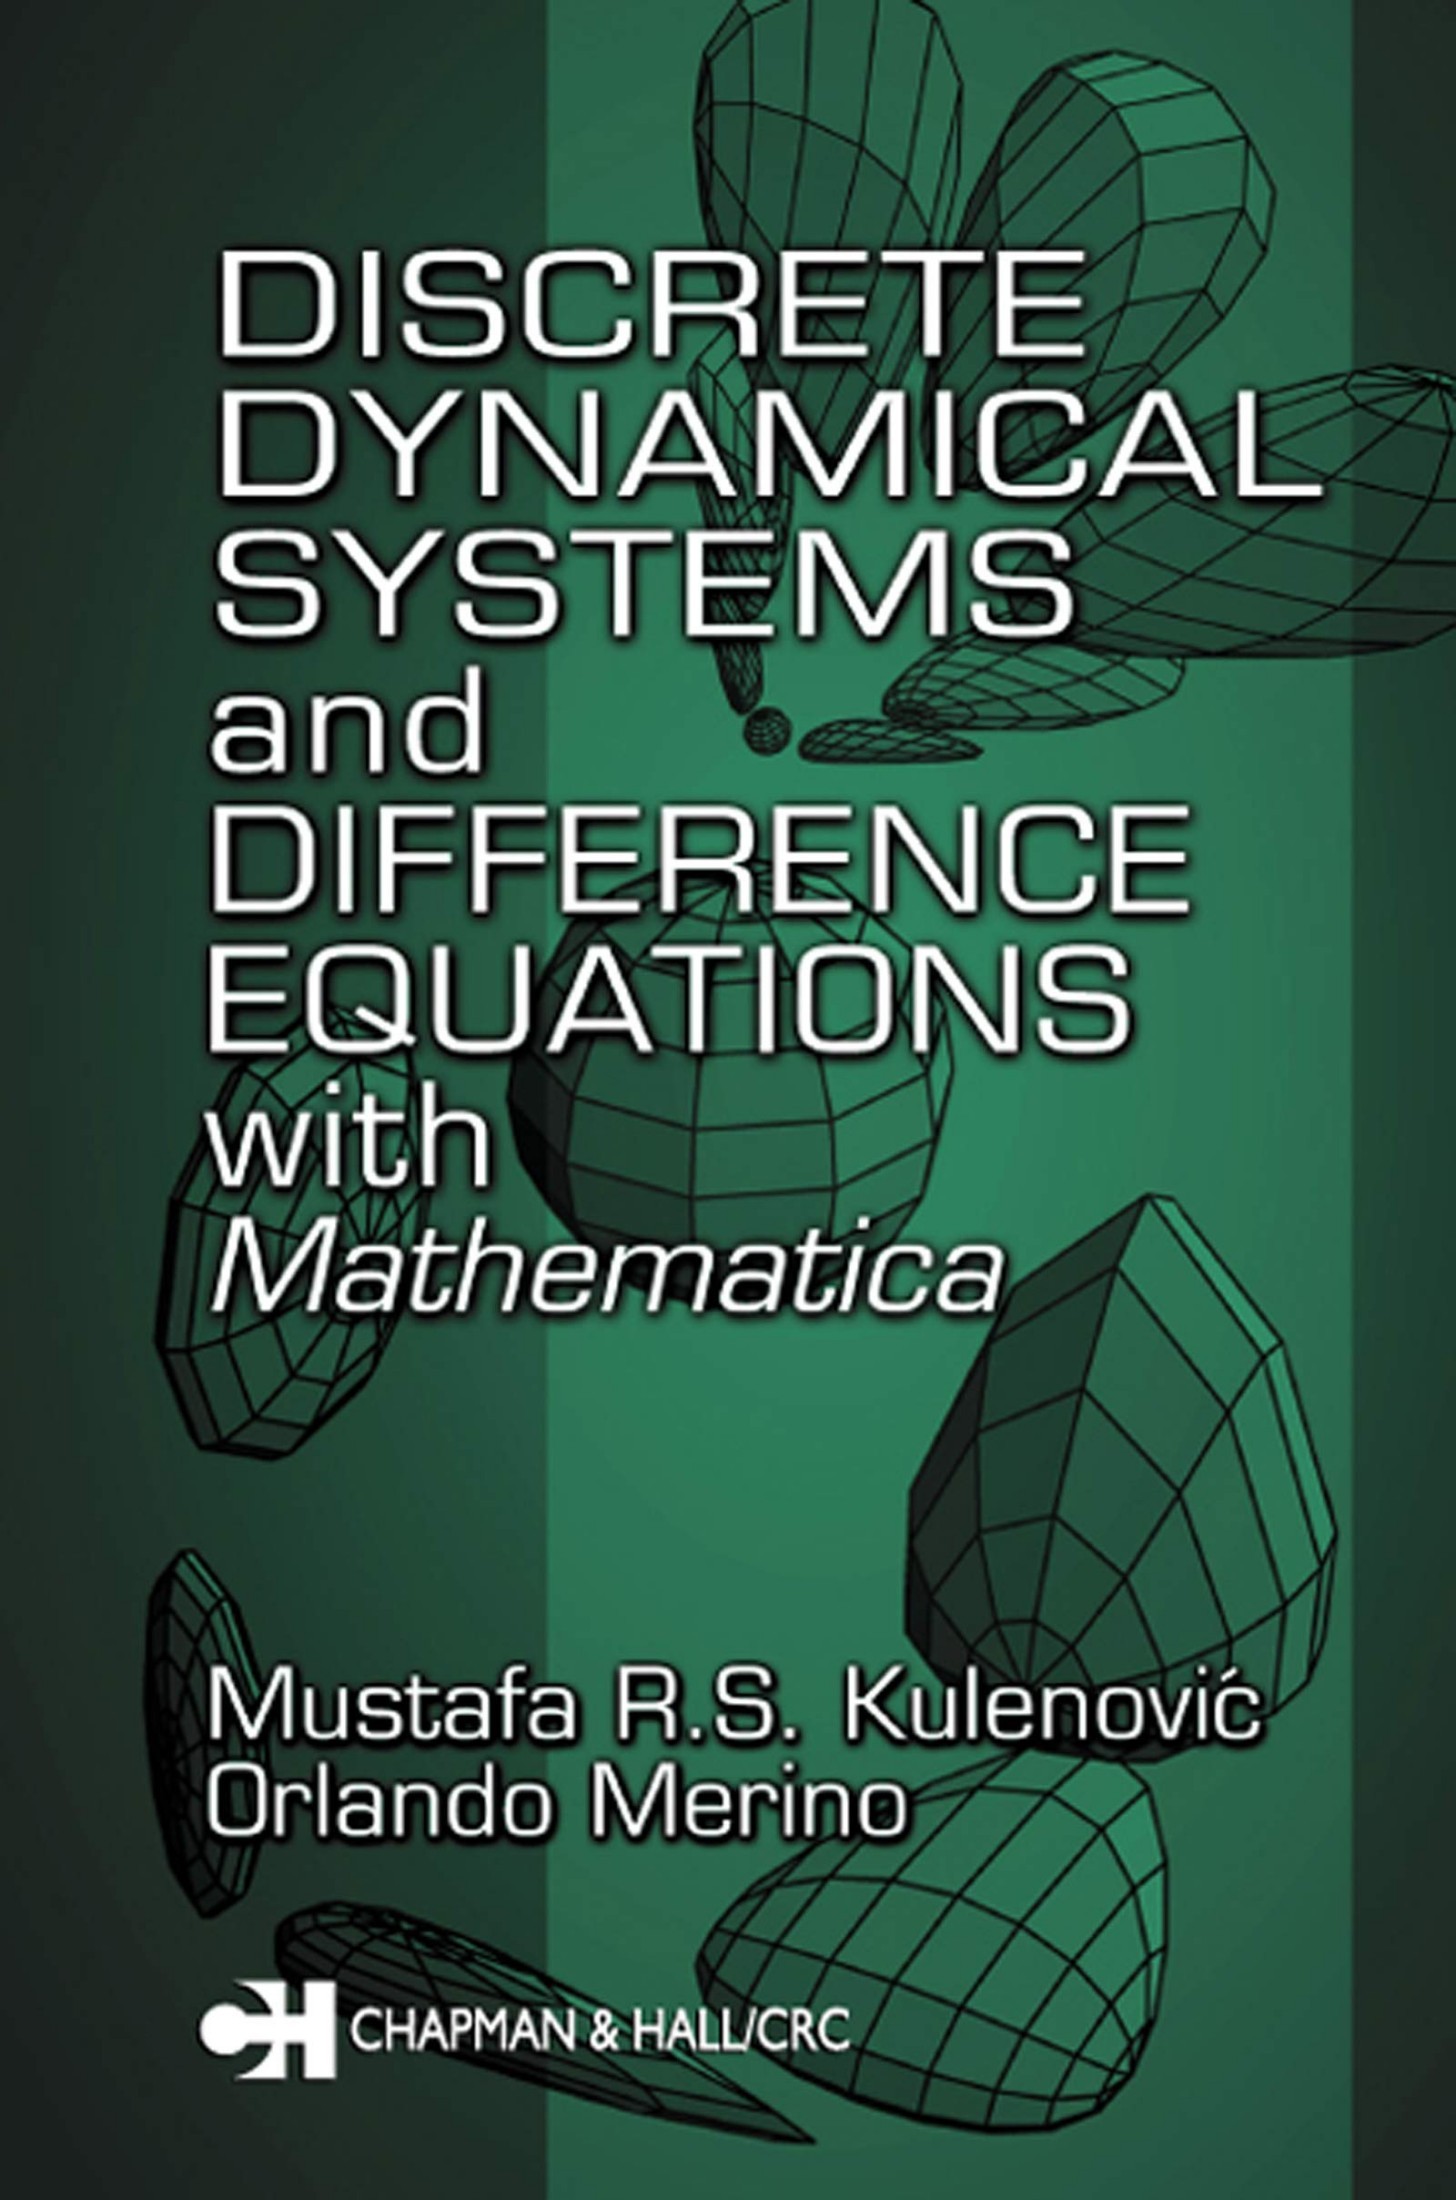 Discrete Dynamical Systems and Difference Equations with Mathematica®